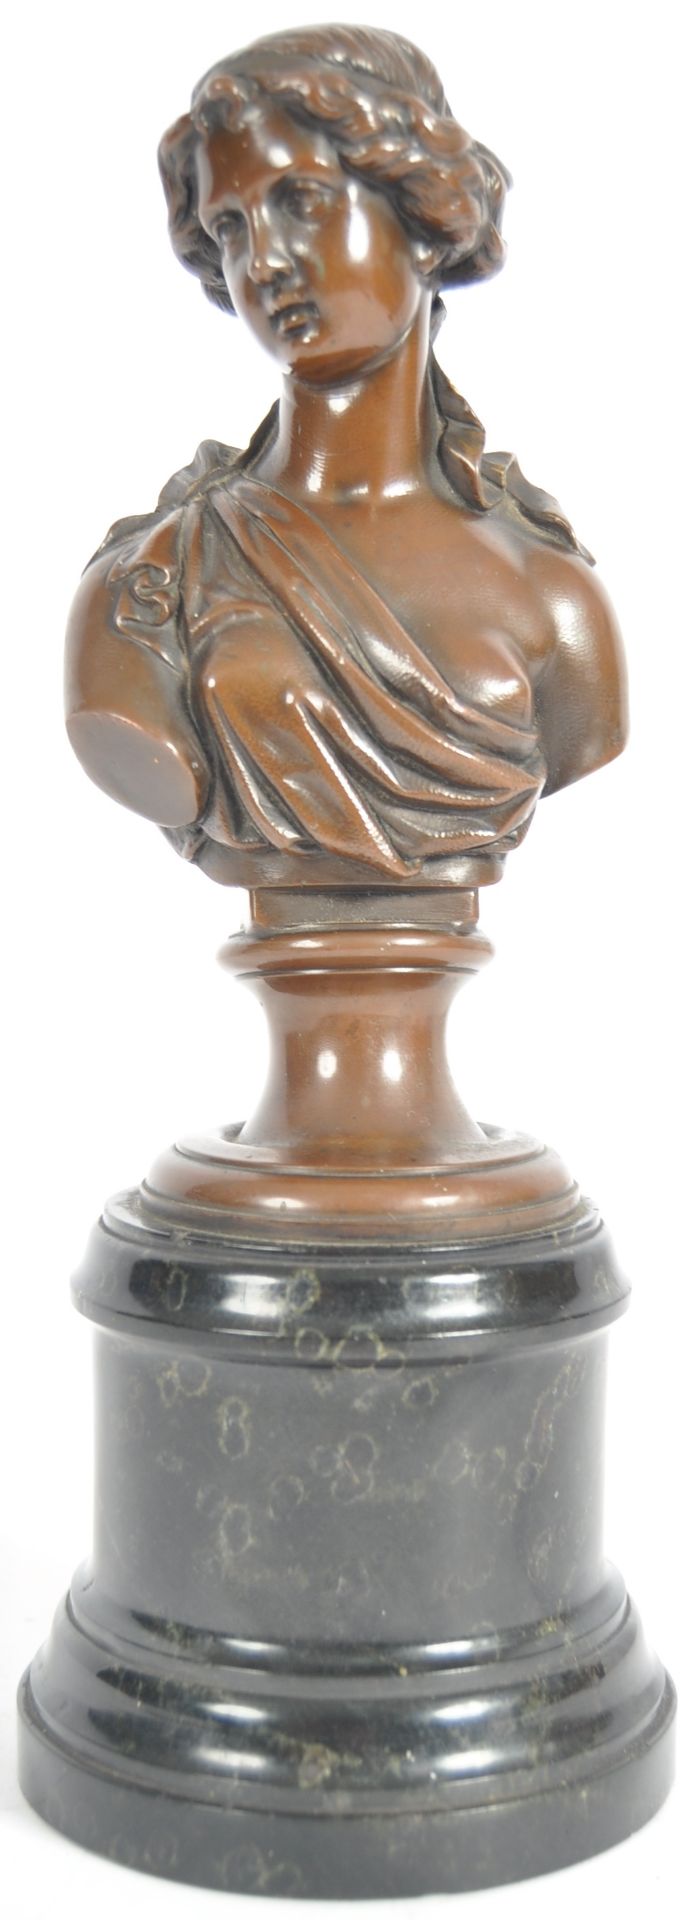 19TH CENTURY BRONZE FIGURINE BUST OF A YOUNG MAIDEN - Image 2 of 9